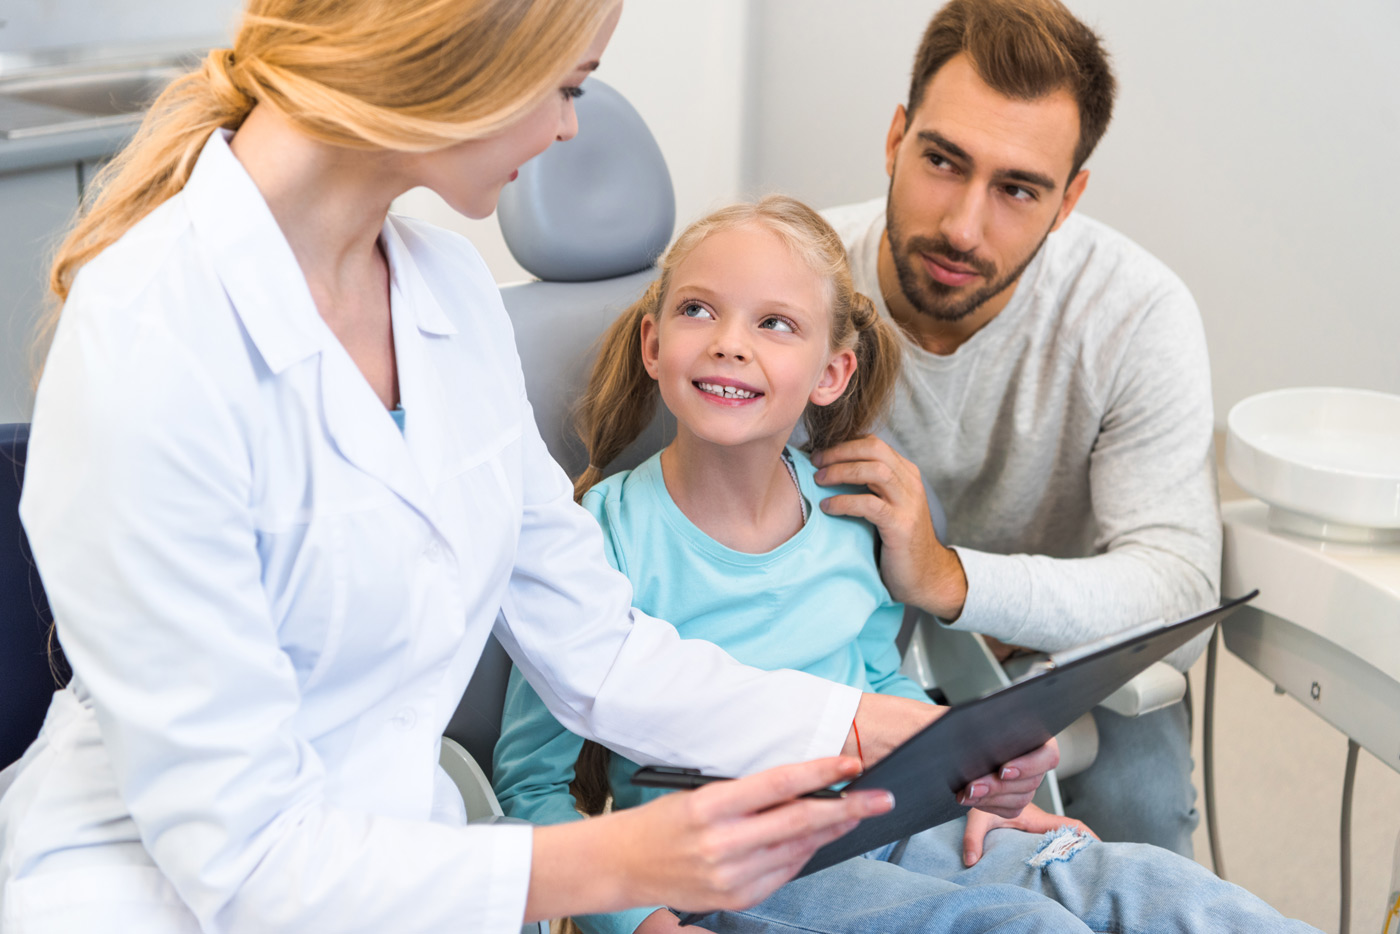 A dentist showing a dental planner a child in the chair, while a comforting father looks on in an orthodontic consultation.